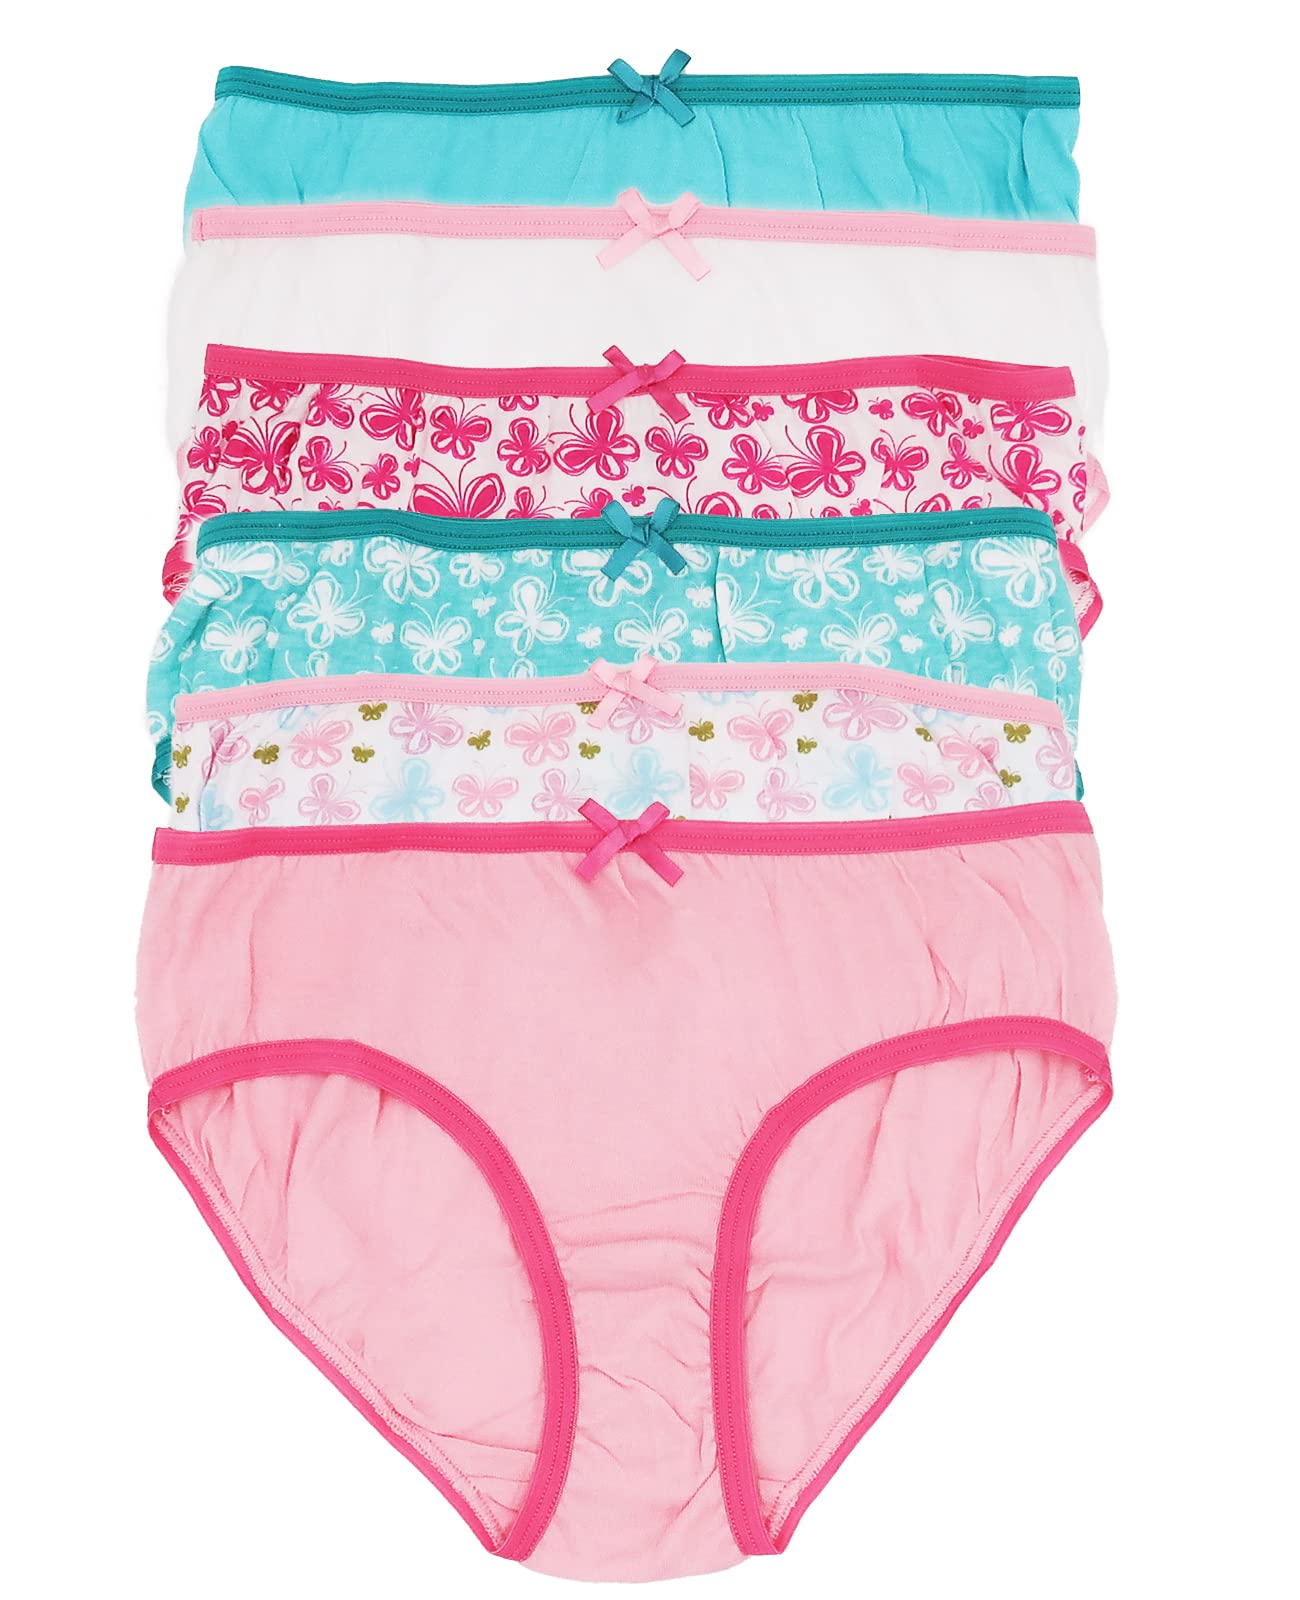 Girls Pants Briefs - Pack Of 6